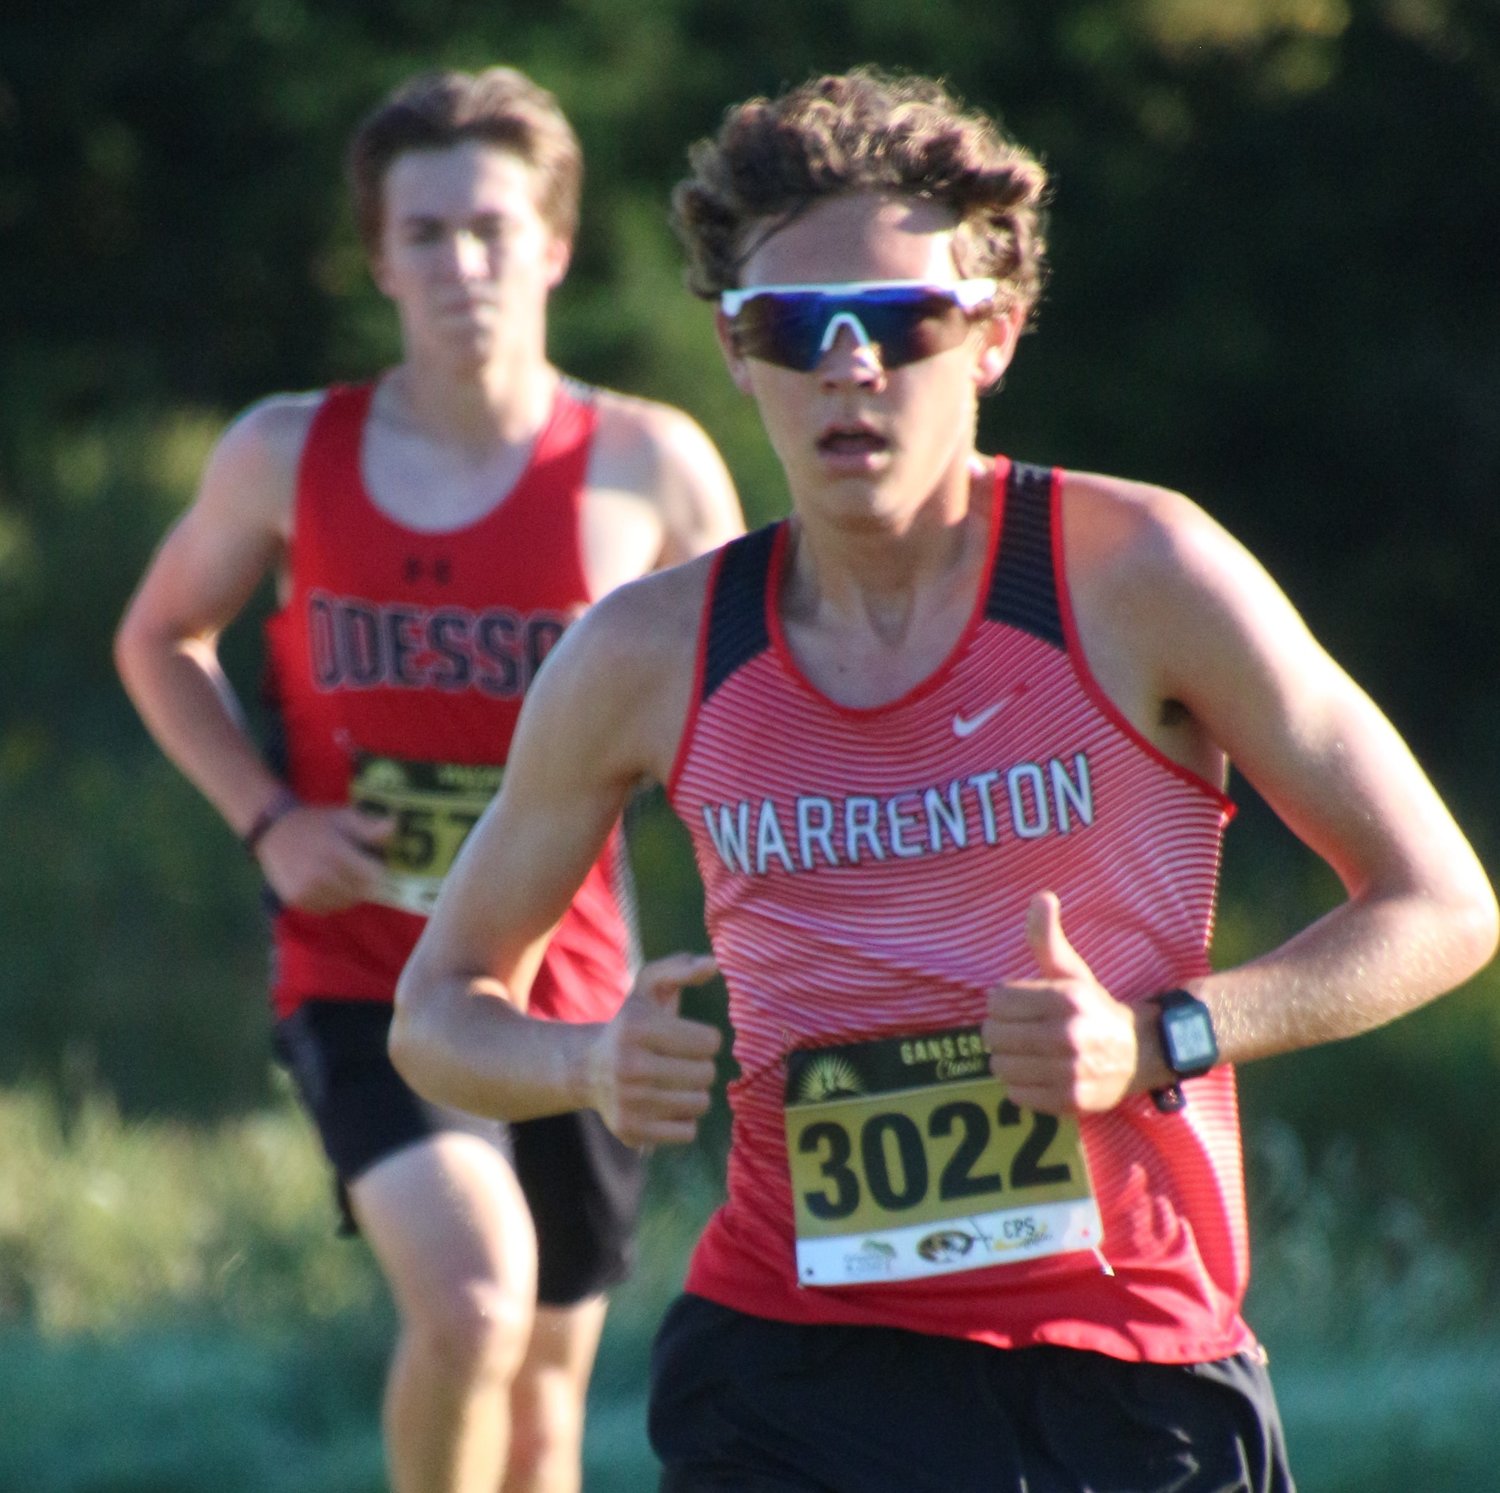 Wyatt Claiborne (right) leads a group of runners during the Gans Creek Classic.